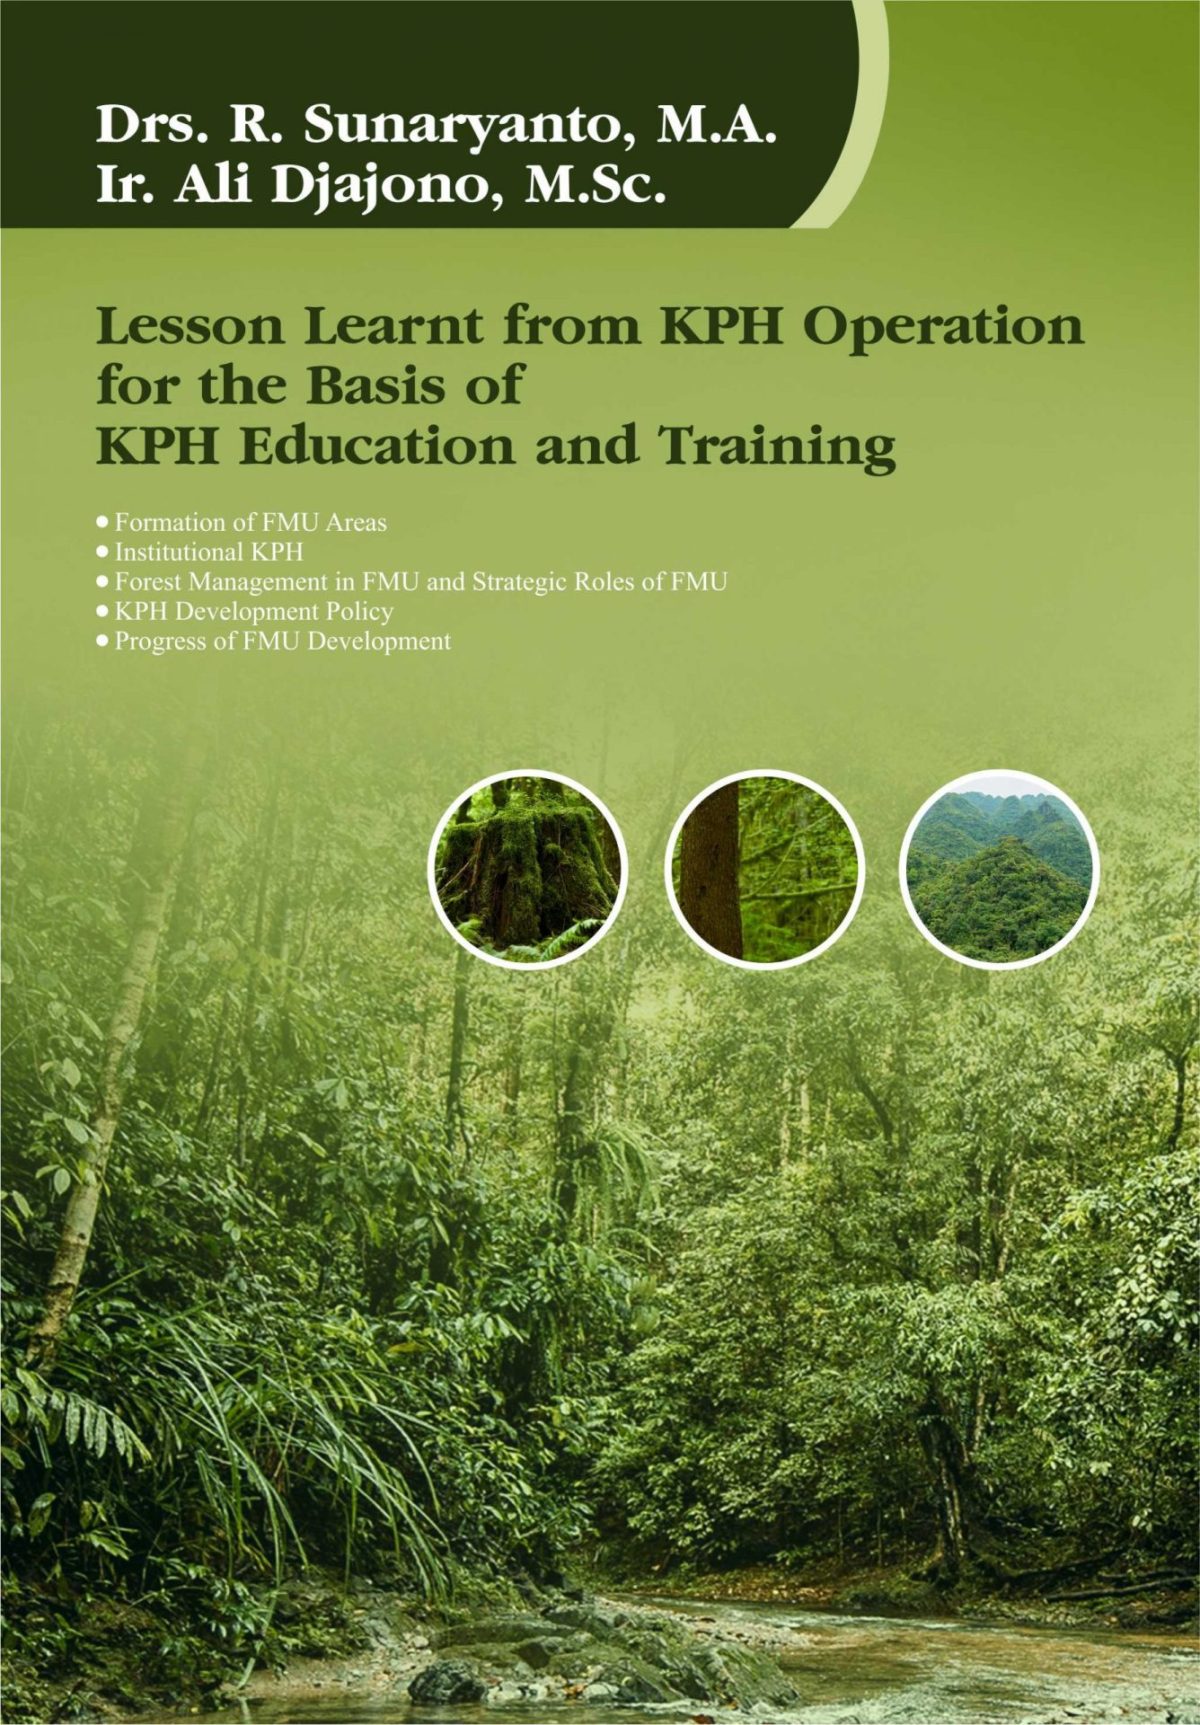 Lesson Learnt from KPH Operation for the Basis of KPH Education and Training